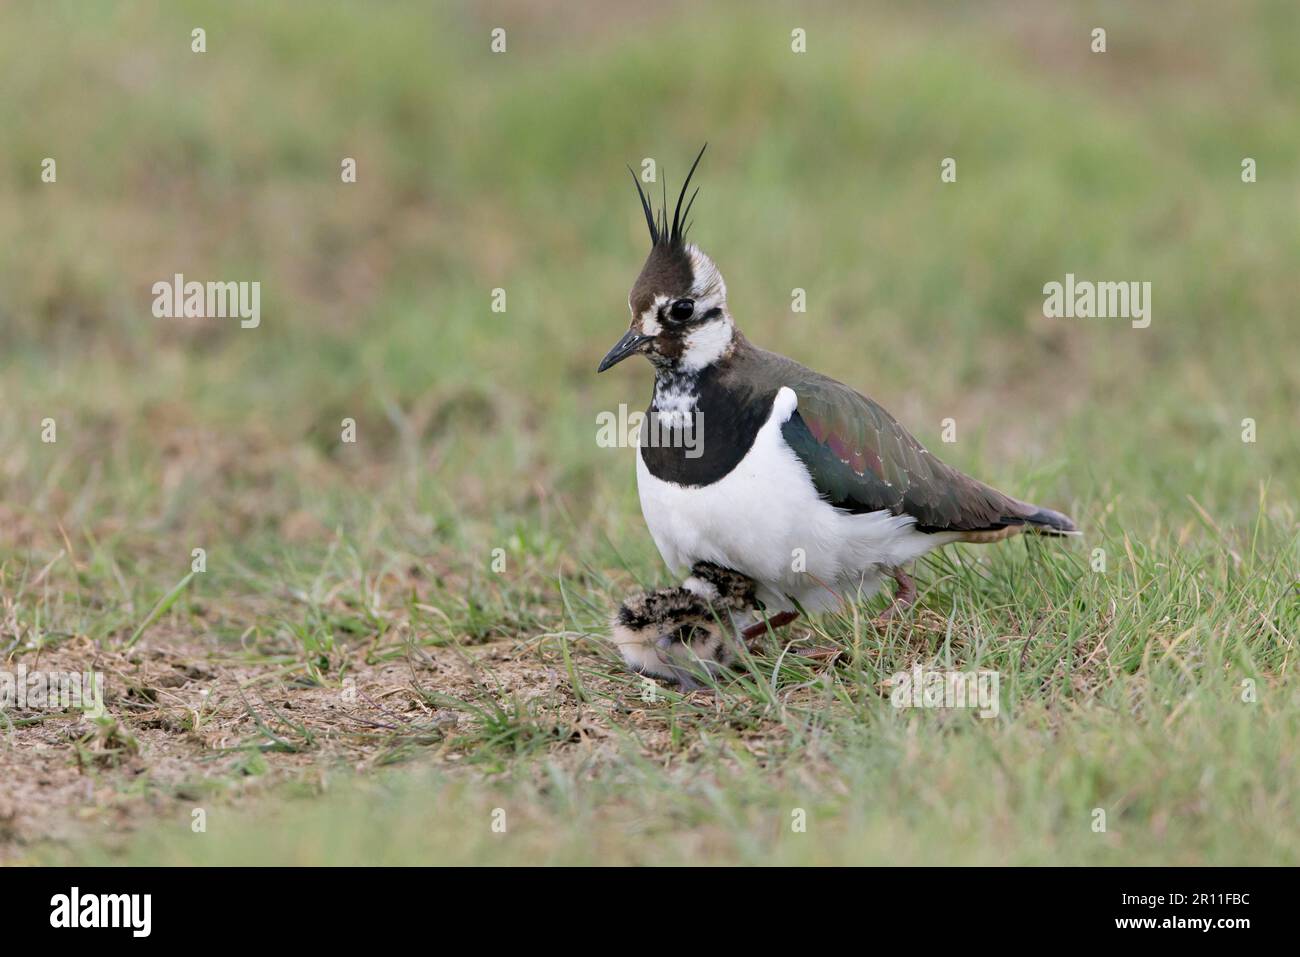 Northern northern lapwing (Vanellus vanellus), adult female, harbouring chicks under body, on grazing marsh, Suffolk, England, United Kingdom Stock Photo